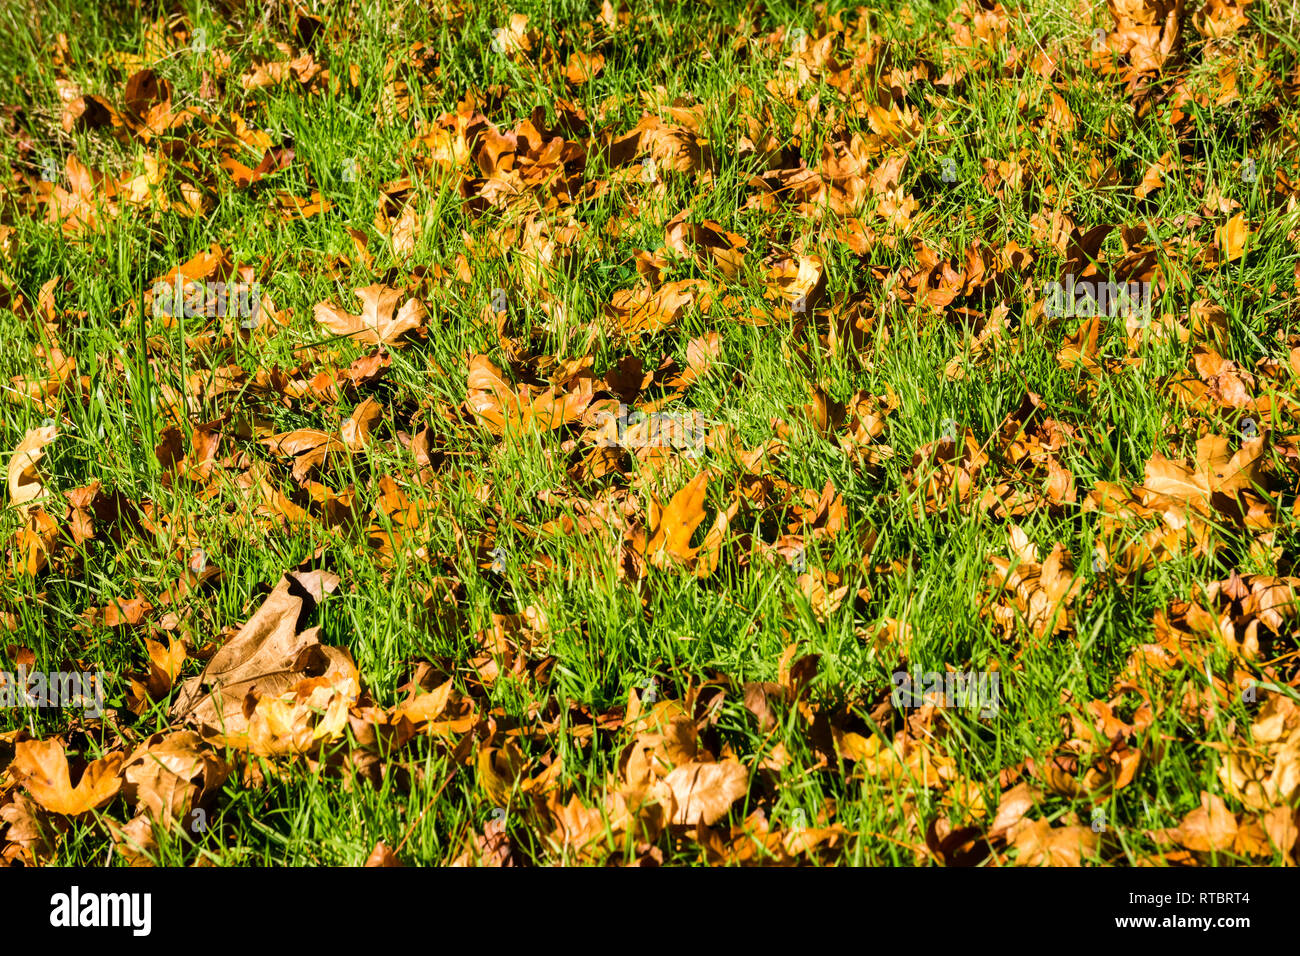 Large fallen Western Sycamore tree (Platanus racemosa) leaves on new grass meadow in autumn, California Stock Photo